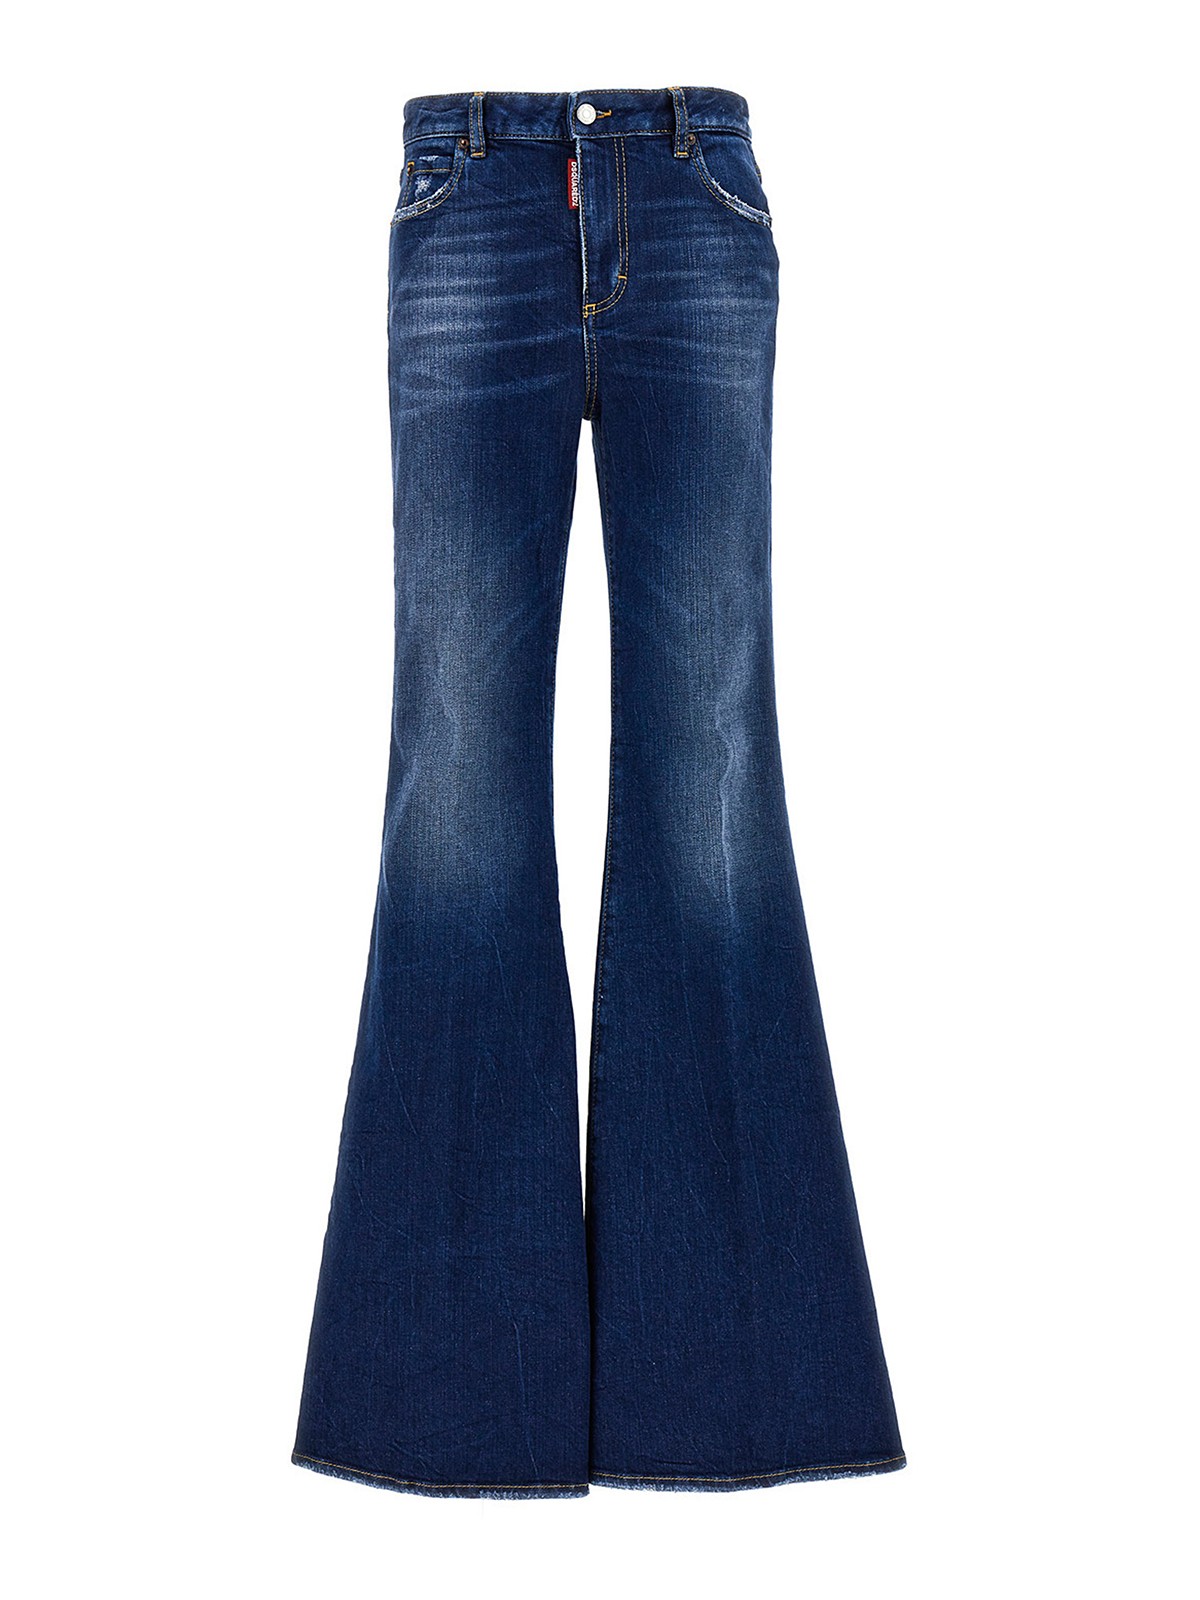 Dsquared2 Stretch Cotton Jeans In Light Wash